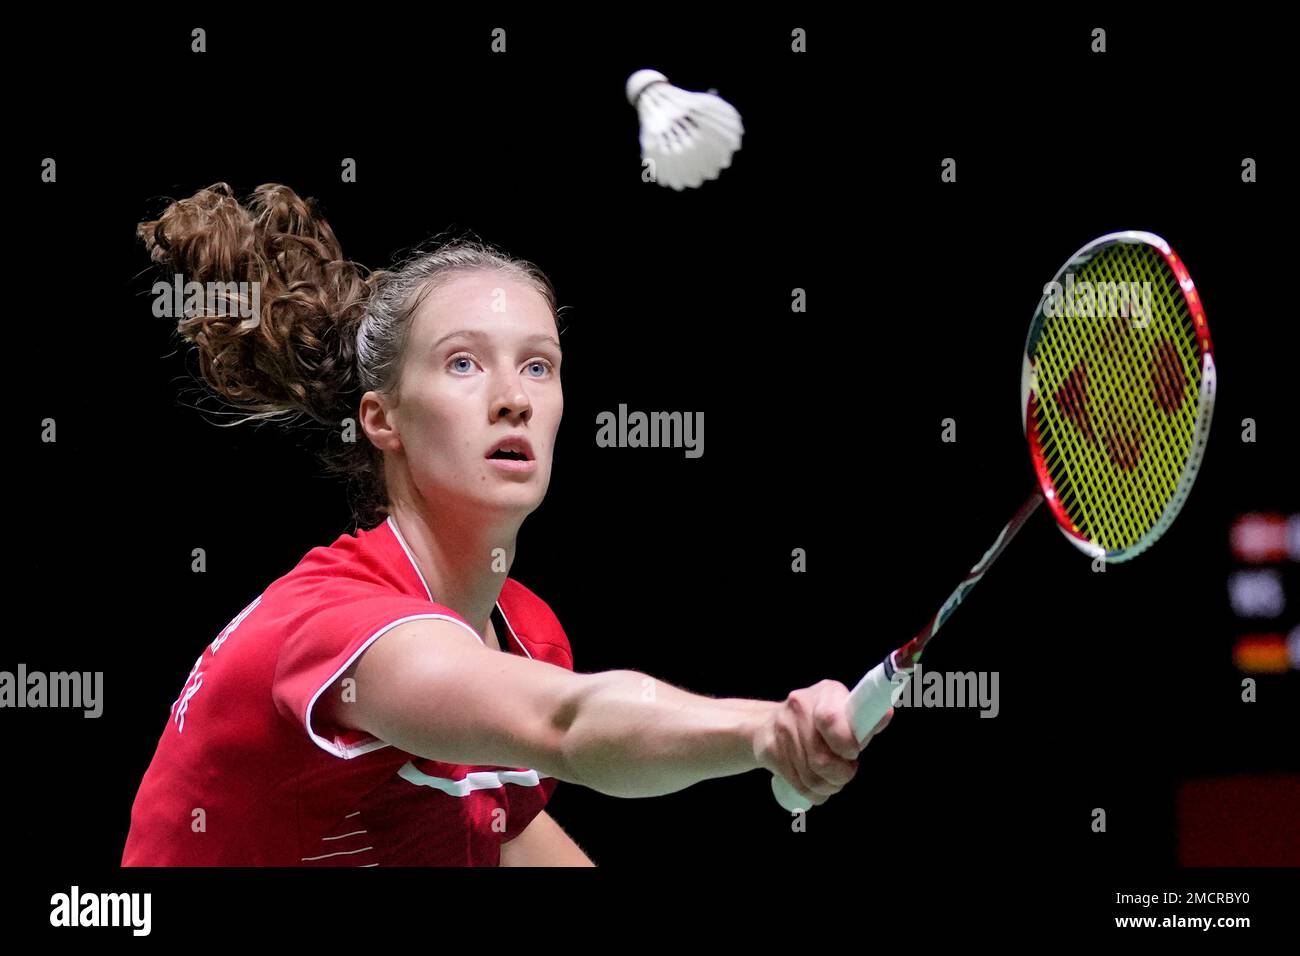 Denmarks Line Christophersen competes against Germanys Yvonne Li during their womens singles badminton group stage match at the BWF World Tour Finals in Nusa Dua, Bali, Indonesia, Friday, Dec